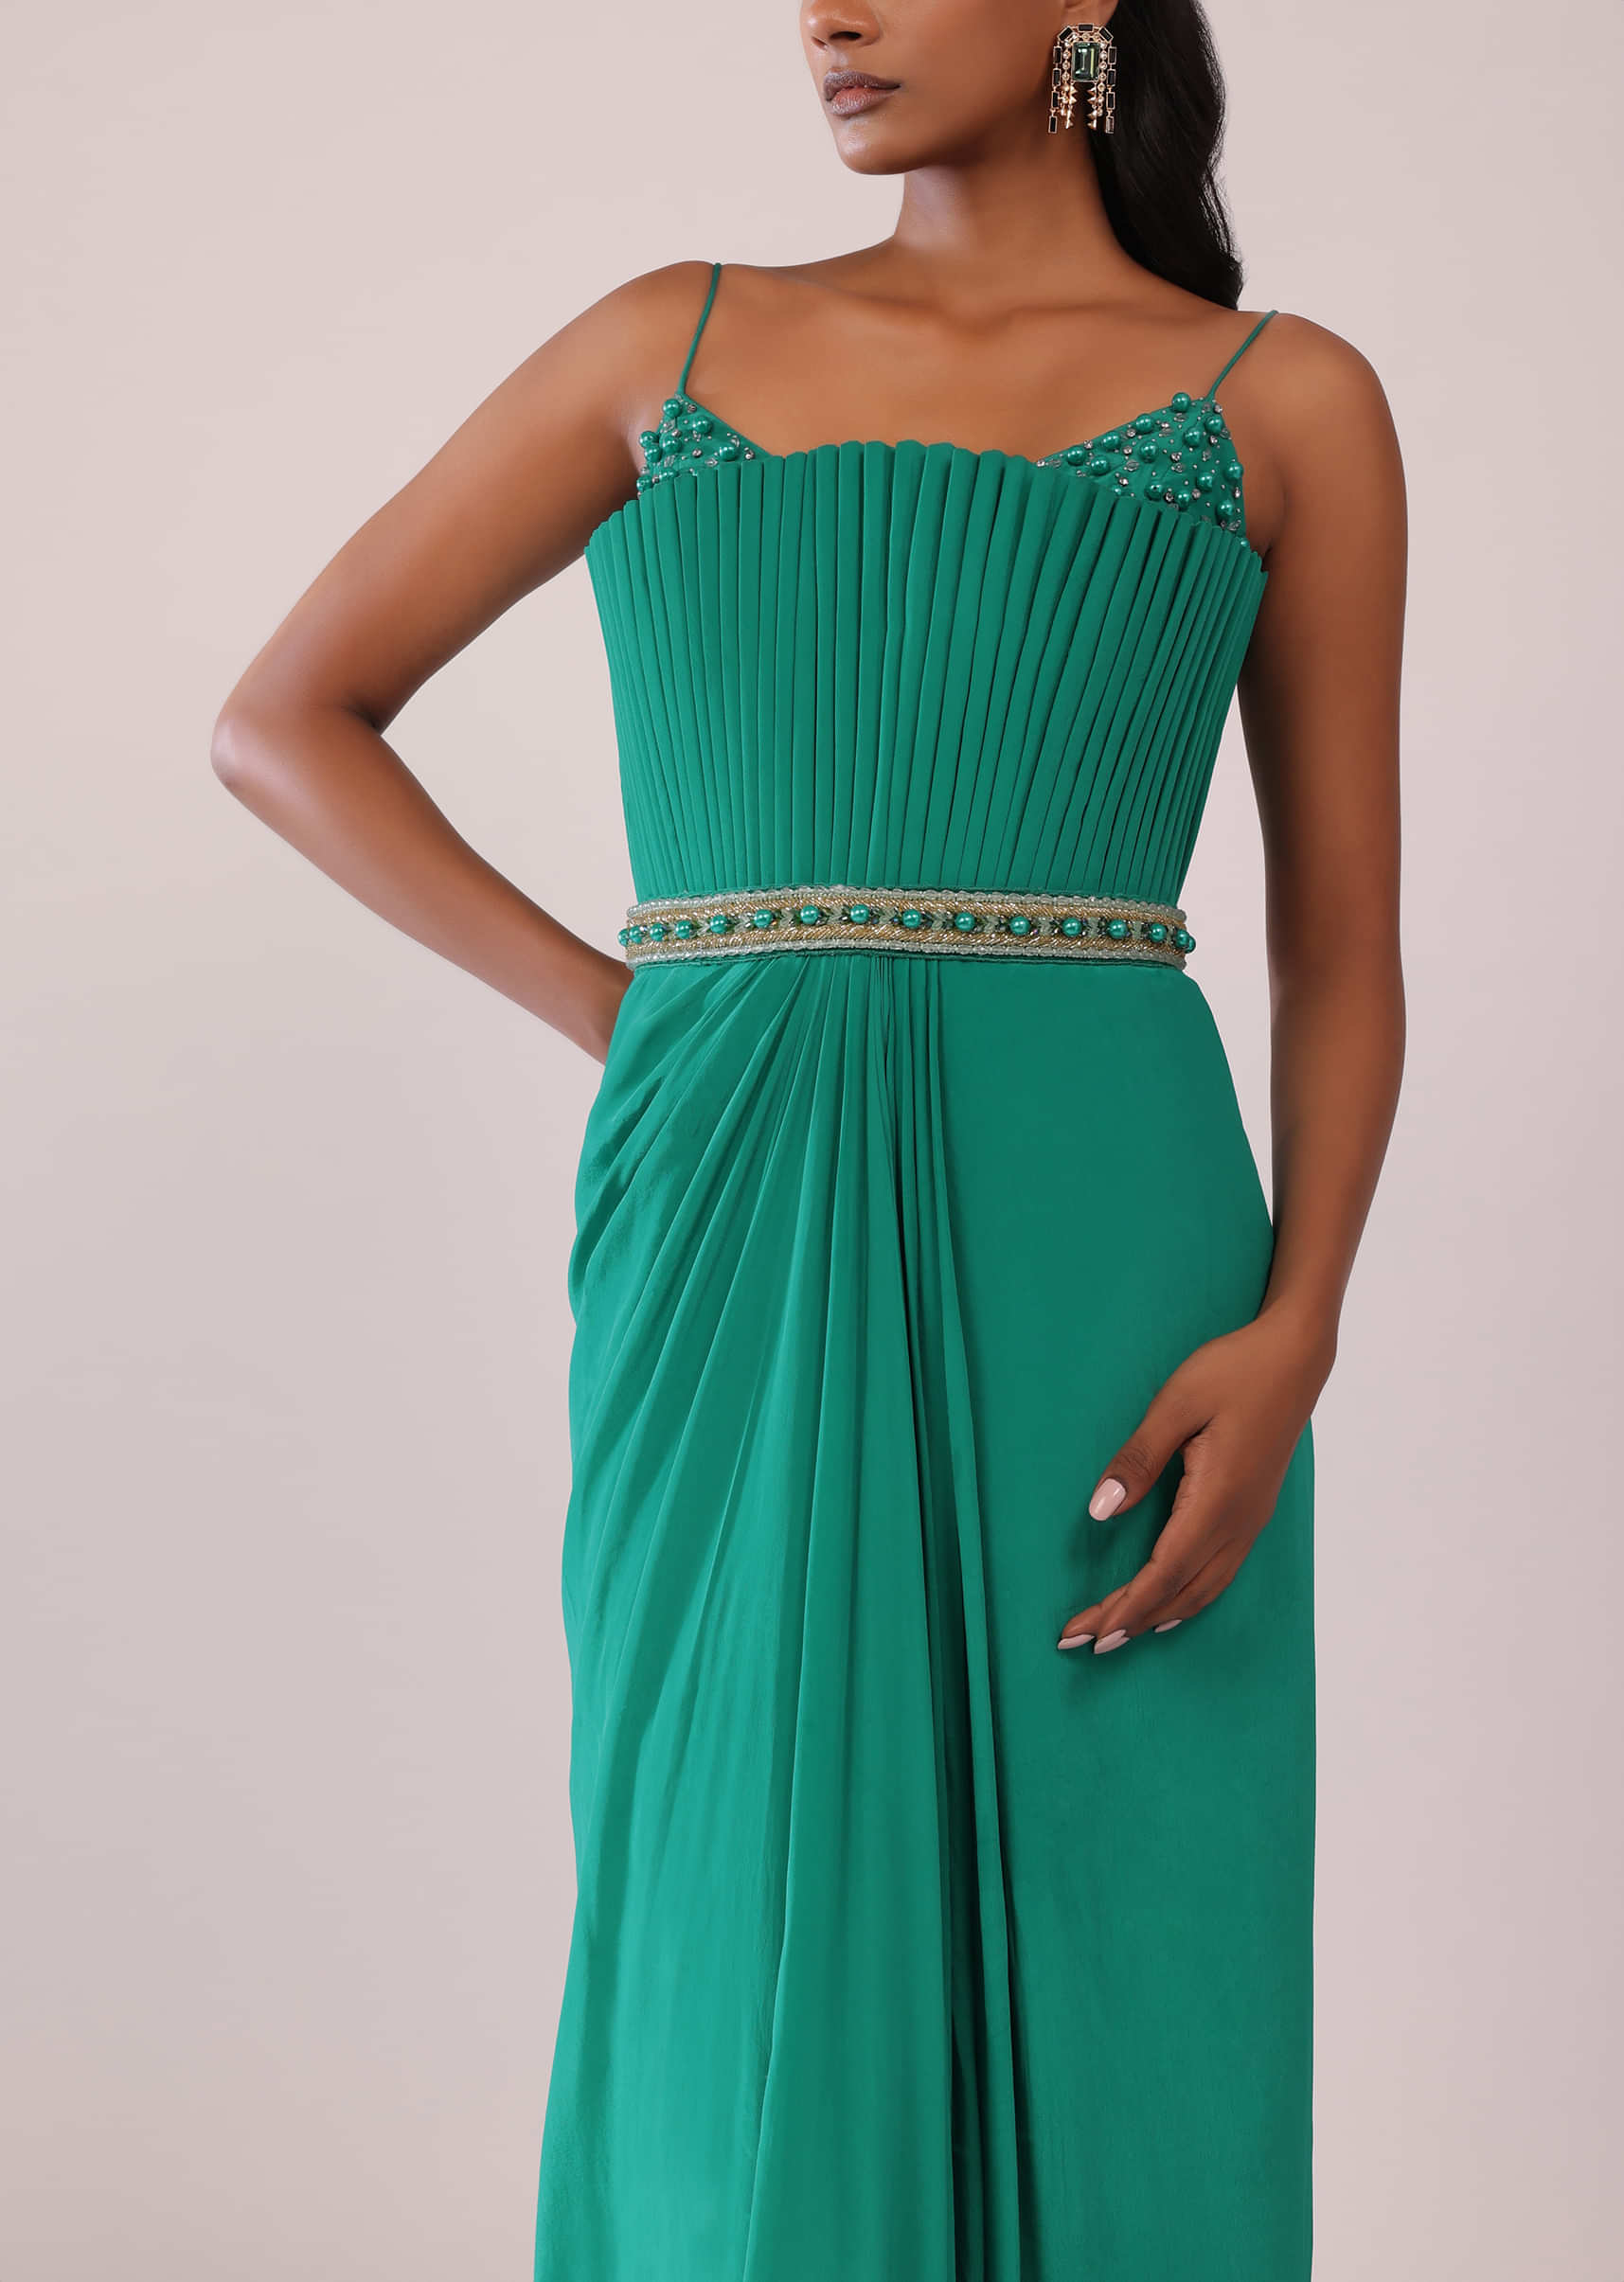 Jade Green Crepe Gown And Belt Adorned With Moti And Beads